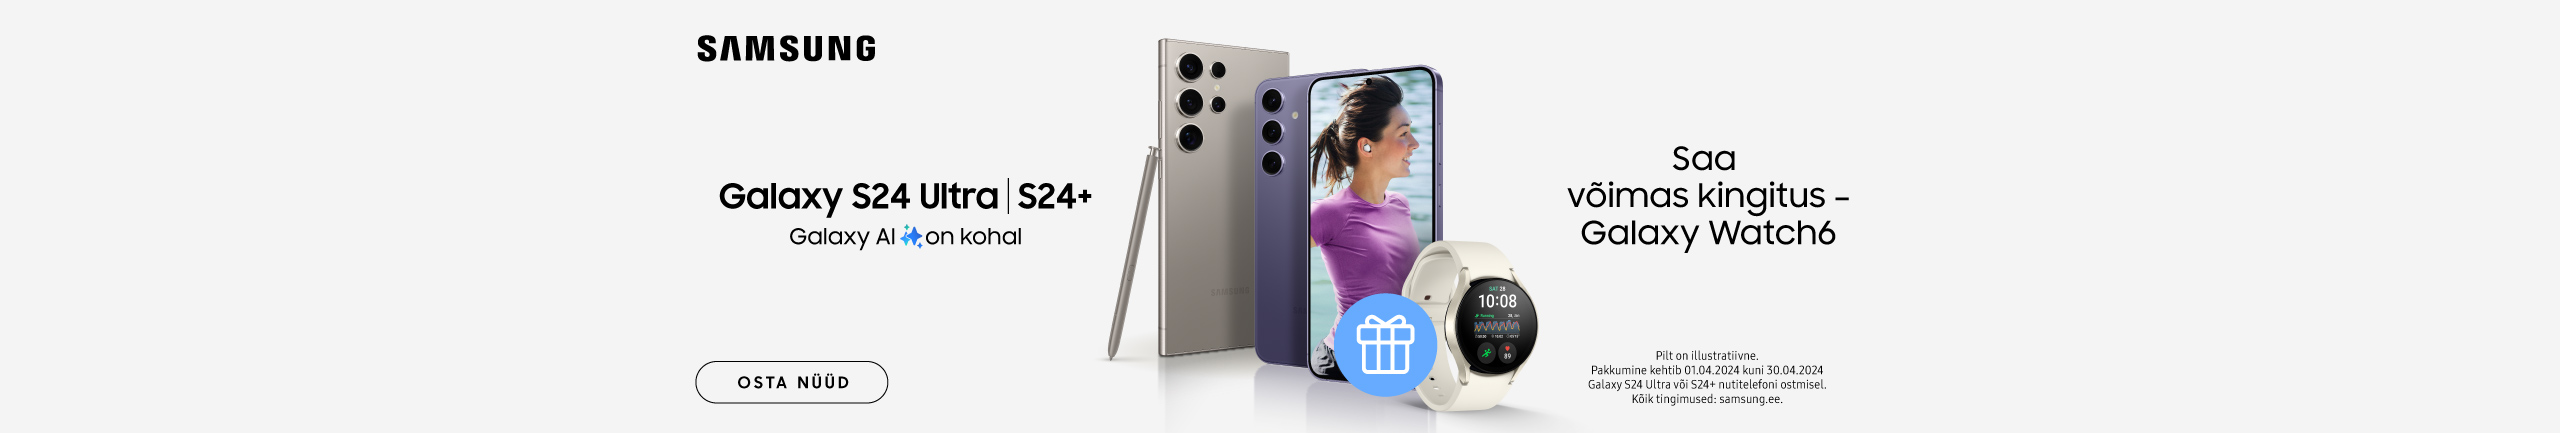 Buy Samsung Galaxy Fold 5, S24+ or S24 Ultra and get Galaxy Watch 6 as a complimentary gift!